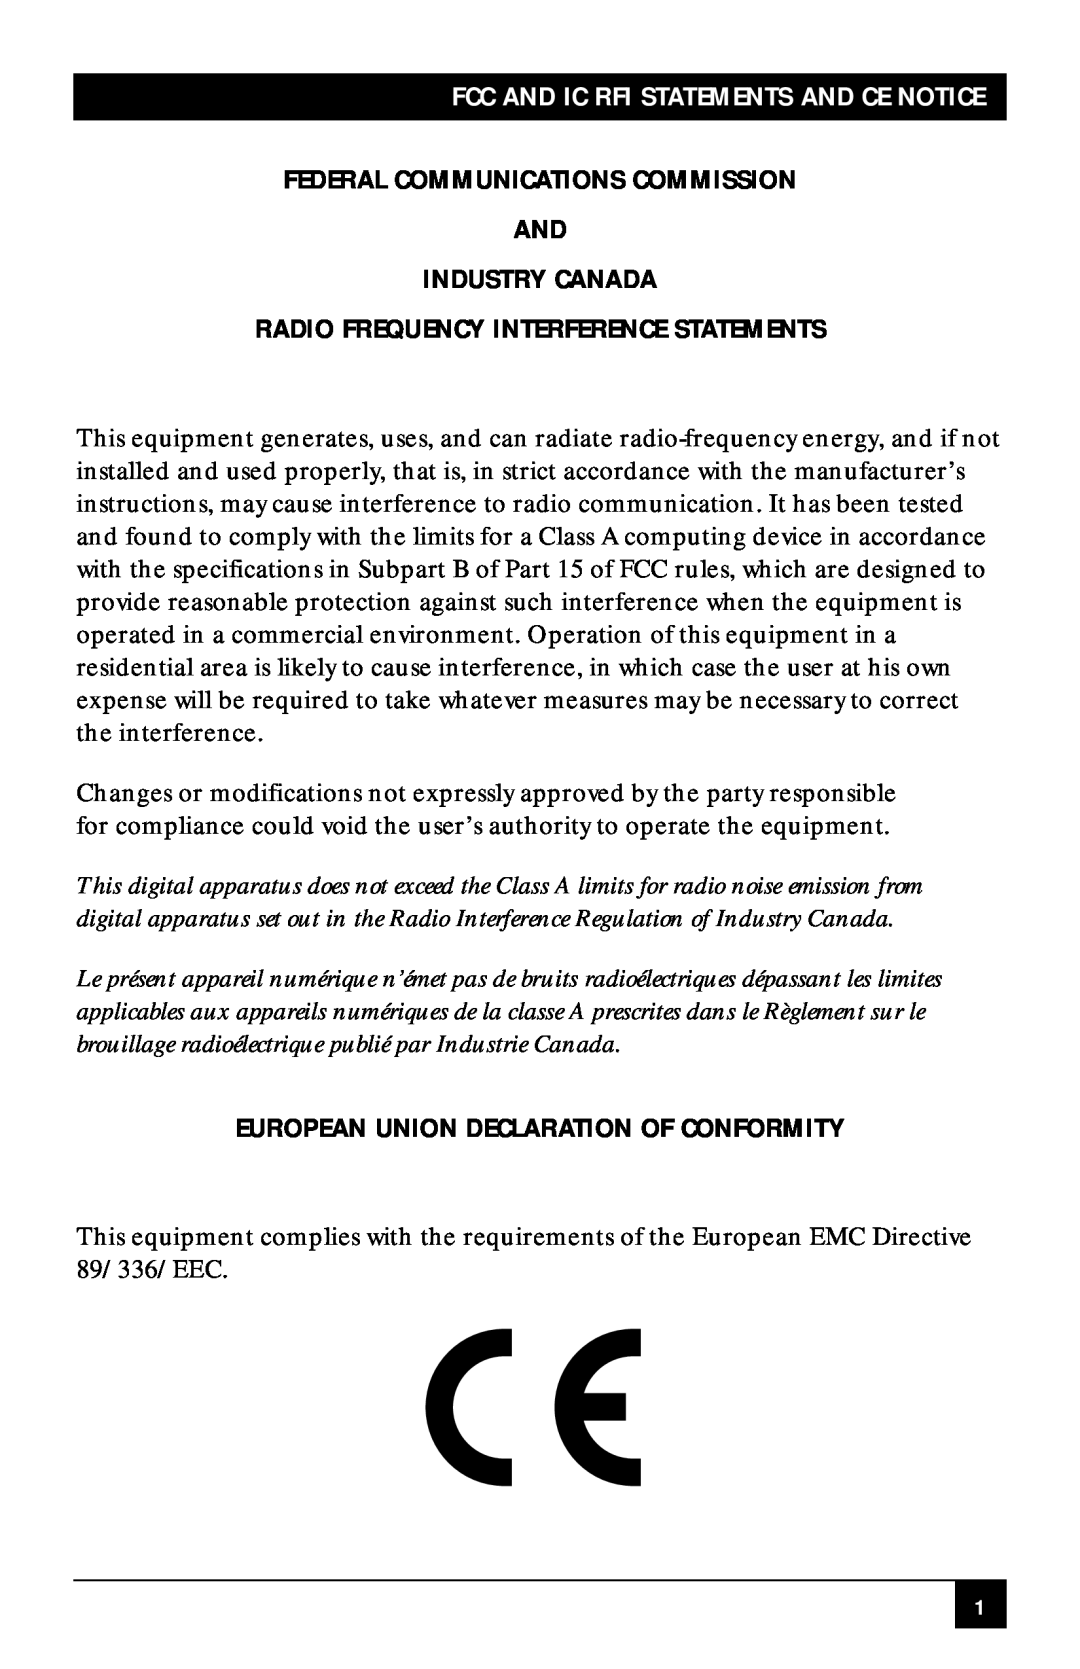 Black Box SWI081A, SWI082 Federal Communications Commission And, Industry Canada, Radio Frequency Interference Statements 